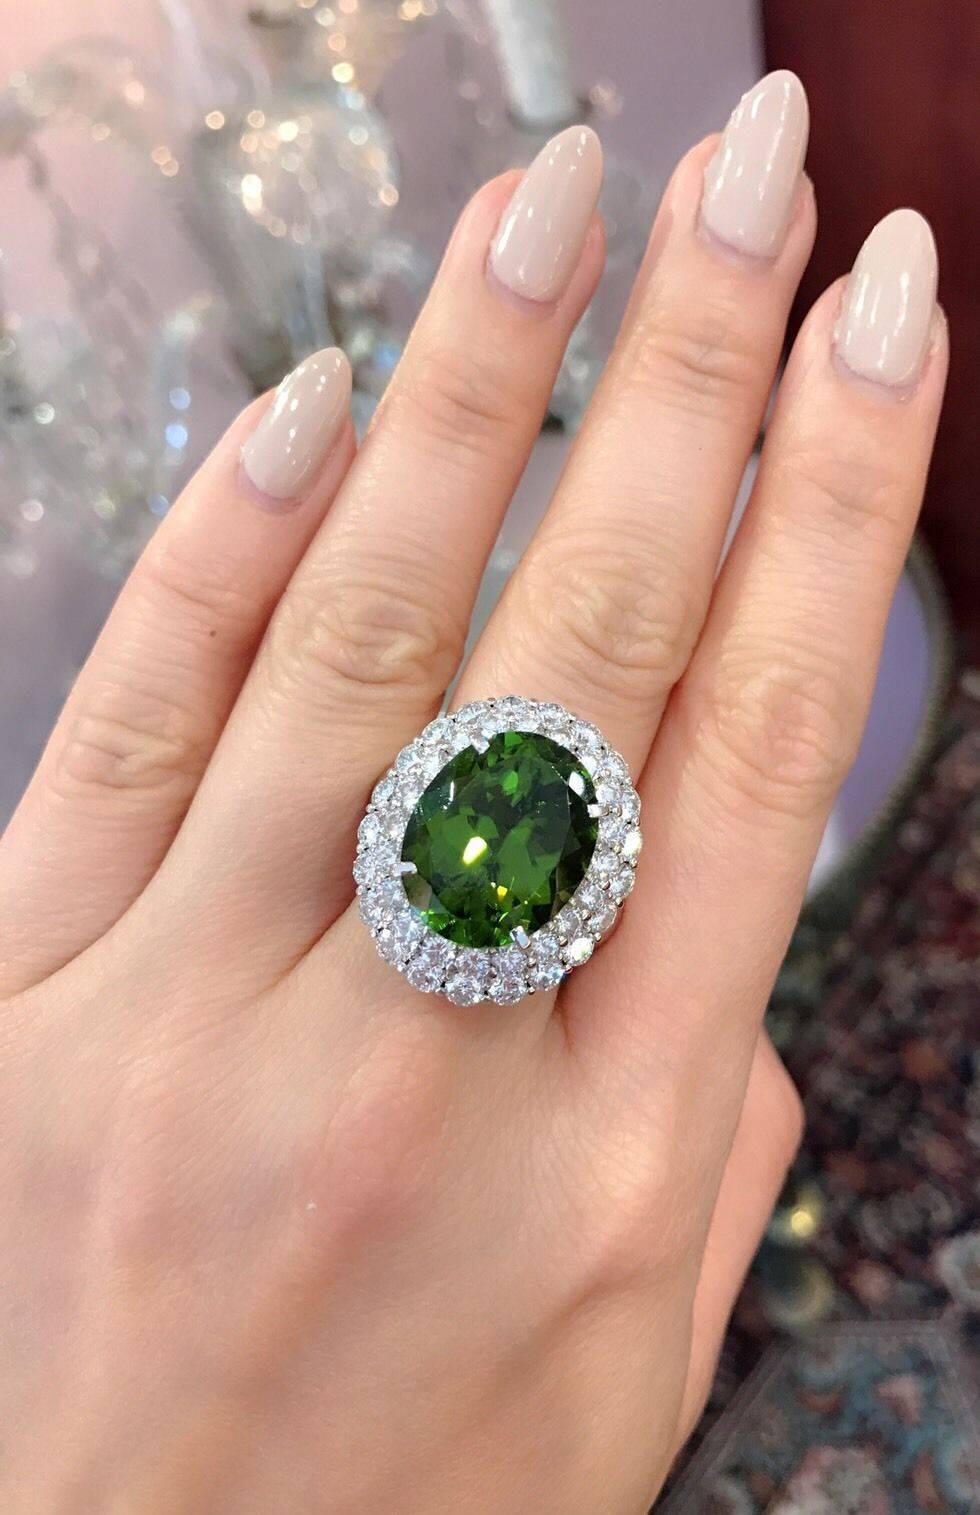 Large Oval Peridot surrounded by two rows of White and Clean Round Brilliant Diamonds in Platinum. The peridot weighs 14.67 carats, with a beautiful deep yellow-green color. It is oval shaped and faceted. The ring has two rows of Round Diamonds. The